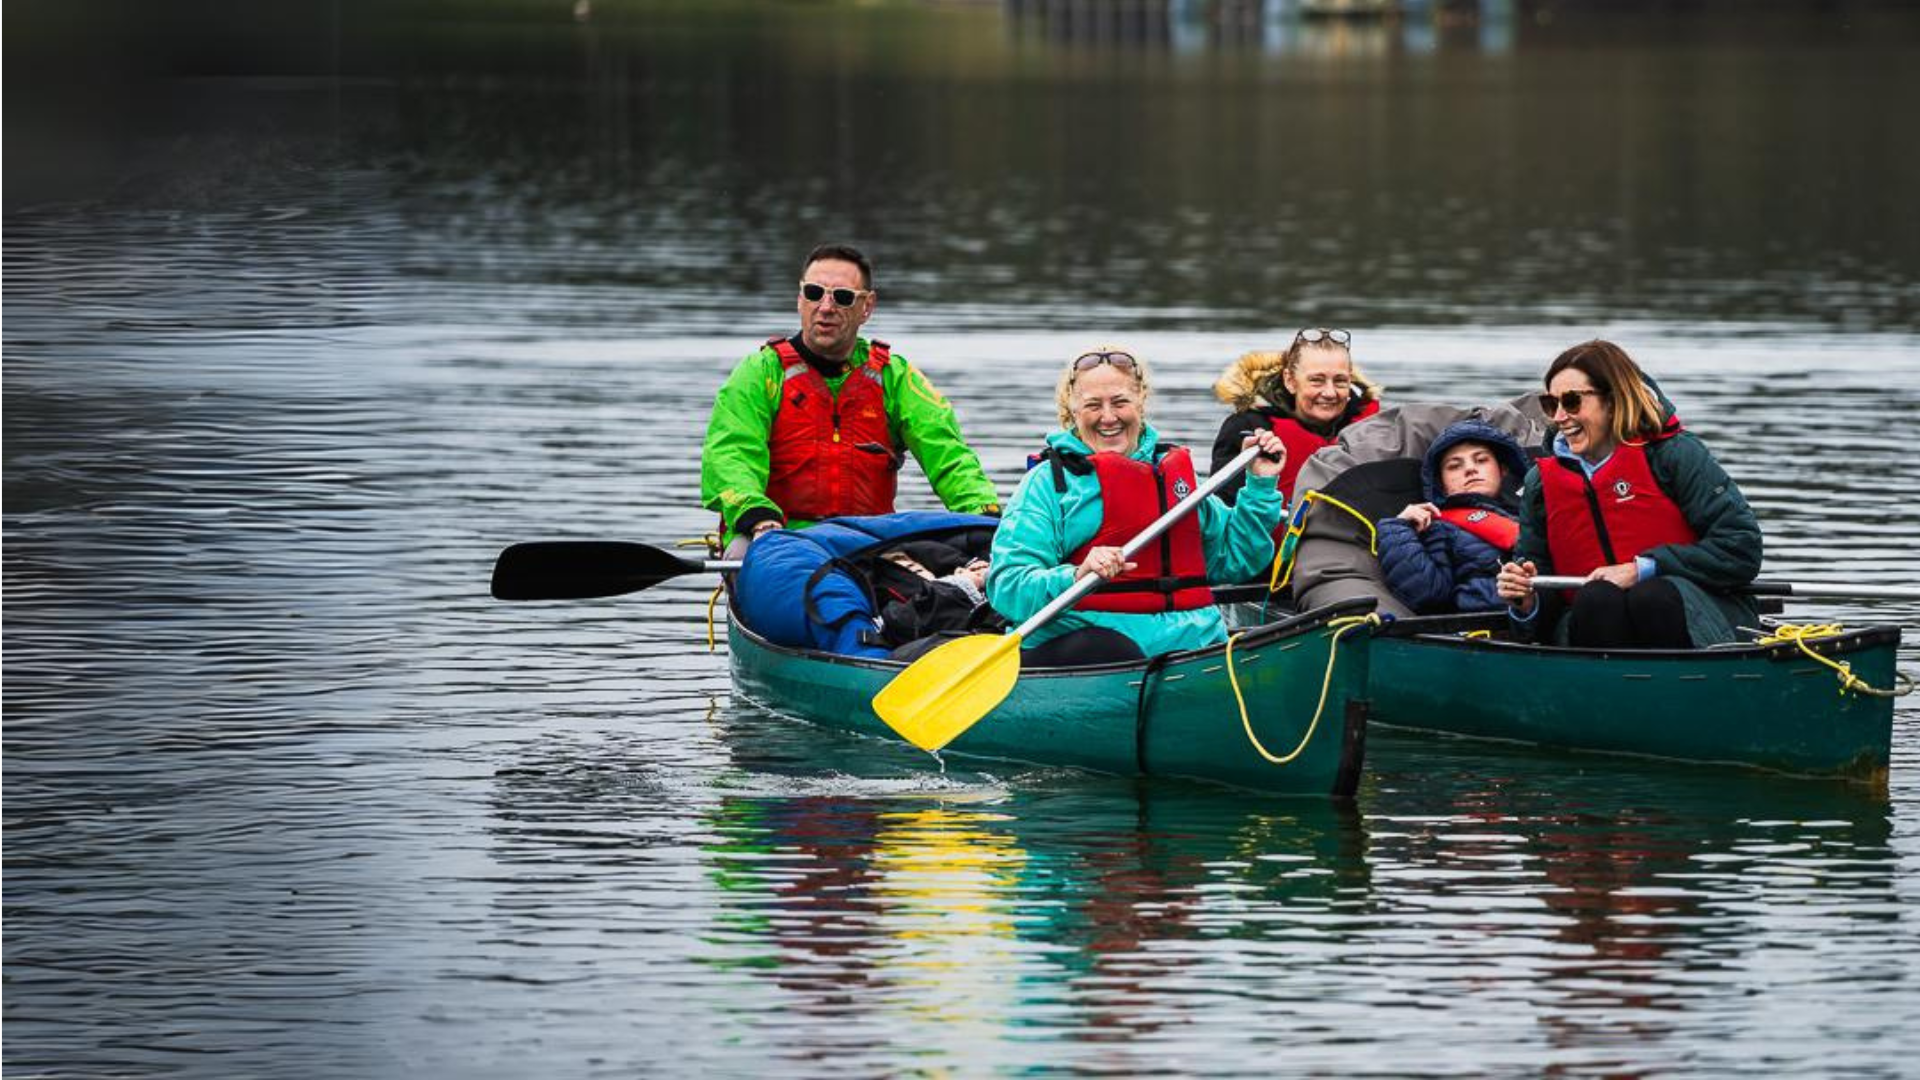 A group of 6 people are smiling and enjoying canoeing on the calm water. The two canoes are rafted together and there is a guest in a beanbag in the middle of each one.